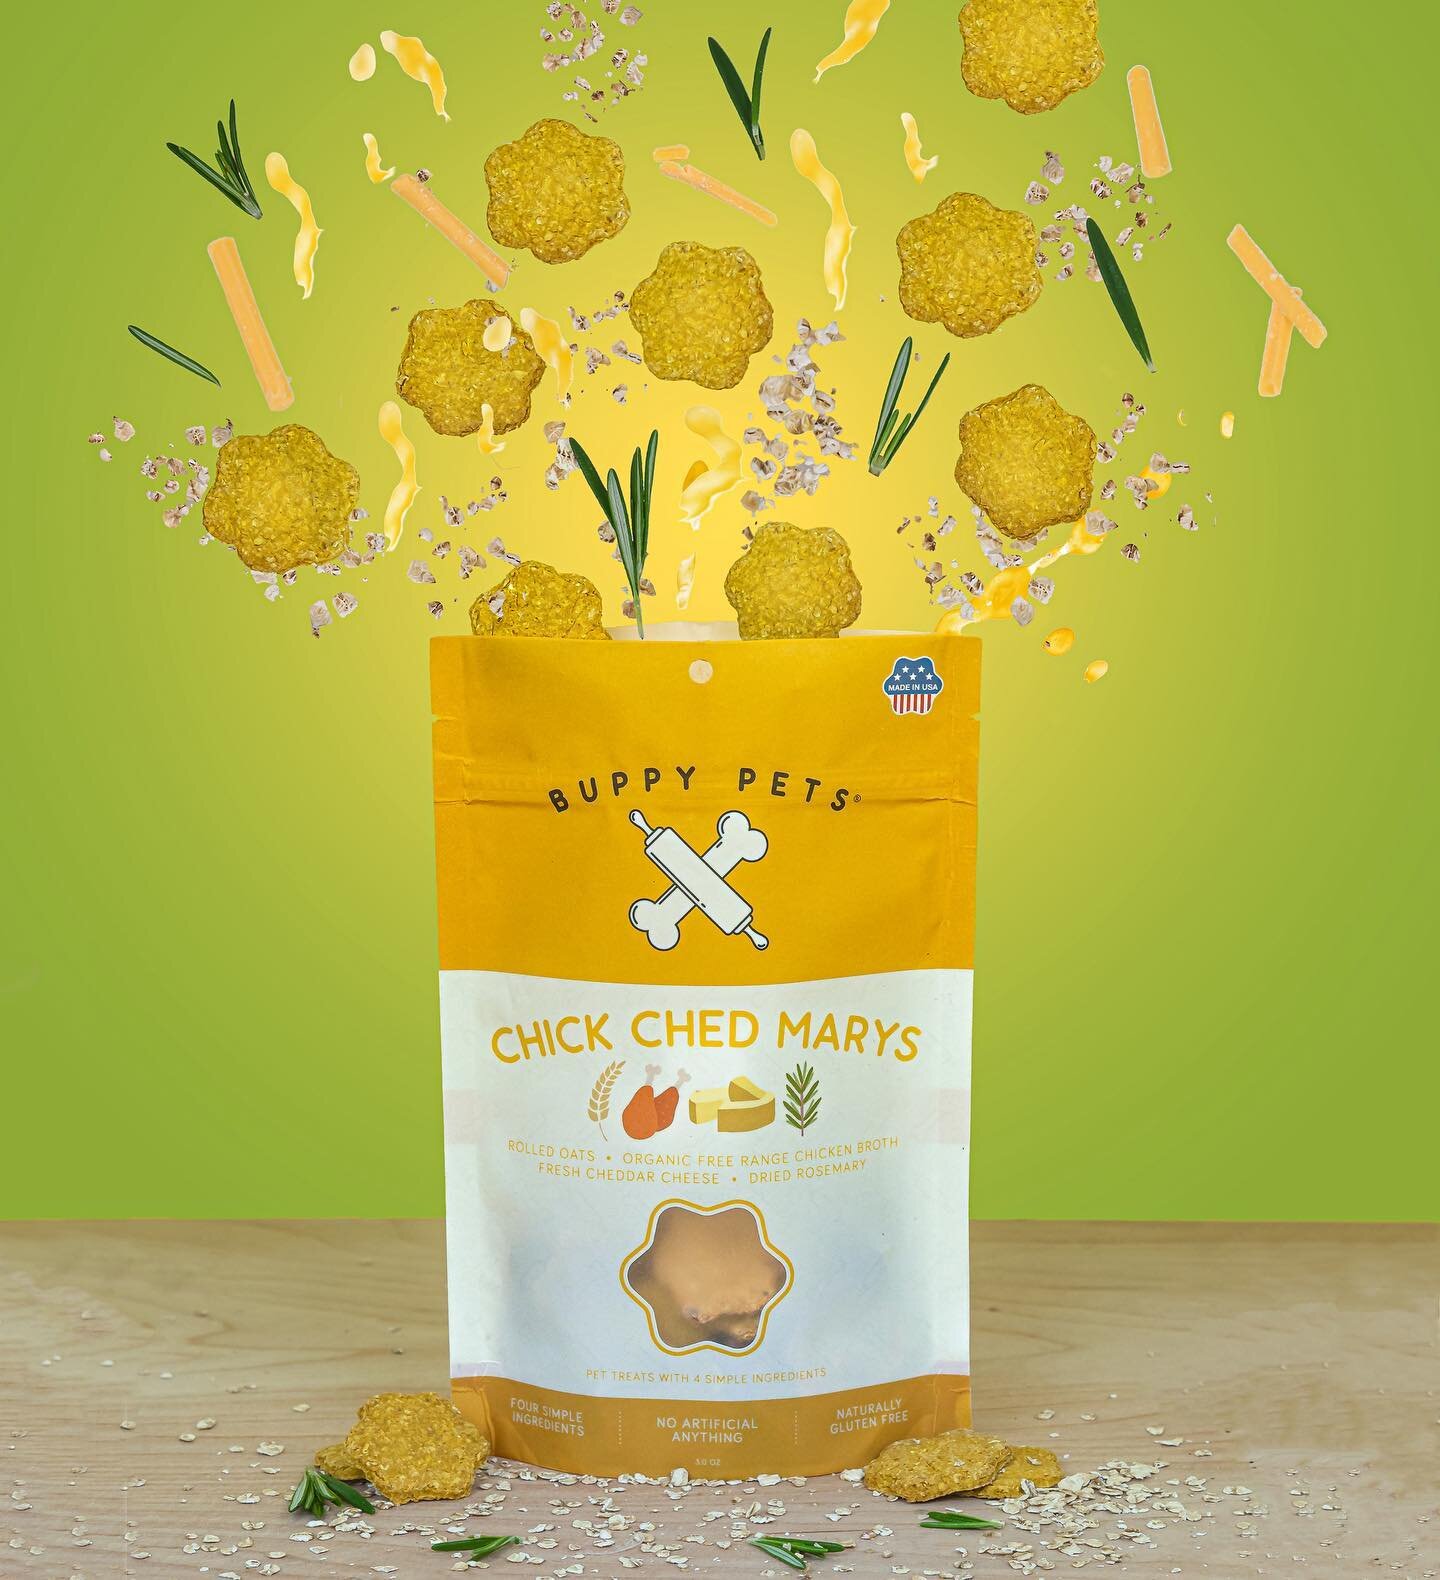 🍗DID YOU KNOW?!🧀

Our entire brand was based on this recipe, the Chick Ched Marys! This was our first flavor created back in 2016 because our dog loves when we snack on cheese and crackers and always begs for a bite, so we got to work making someth